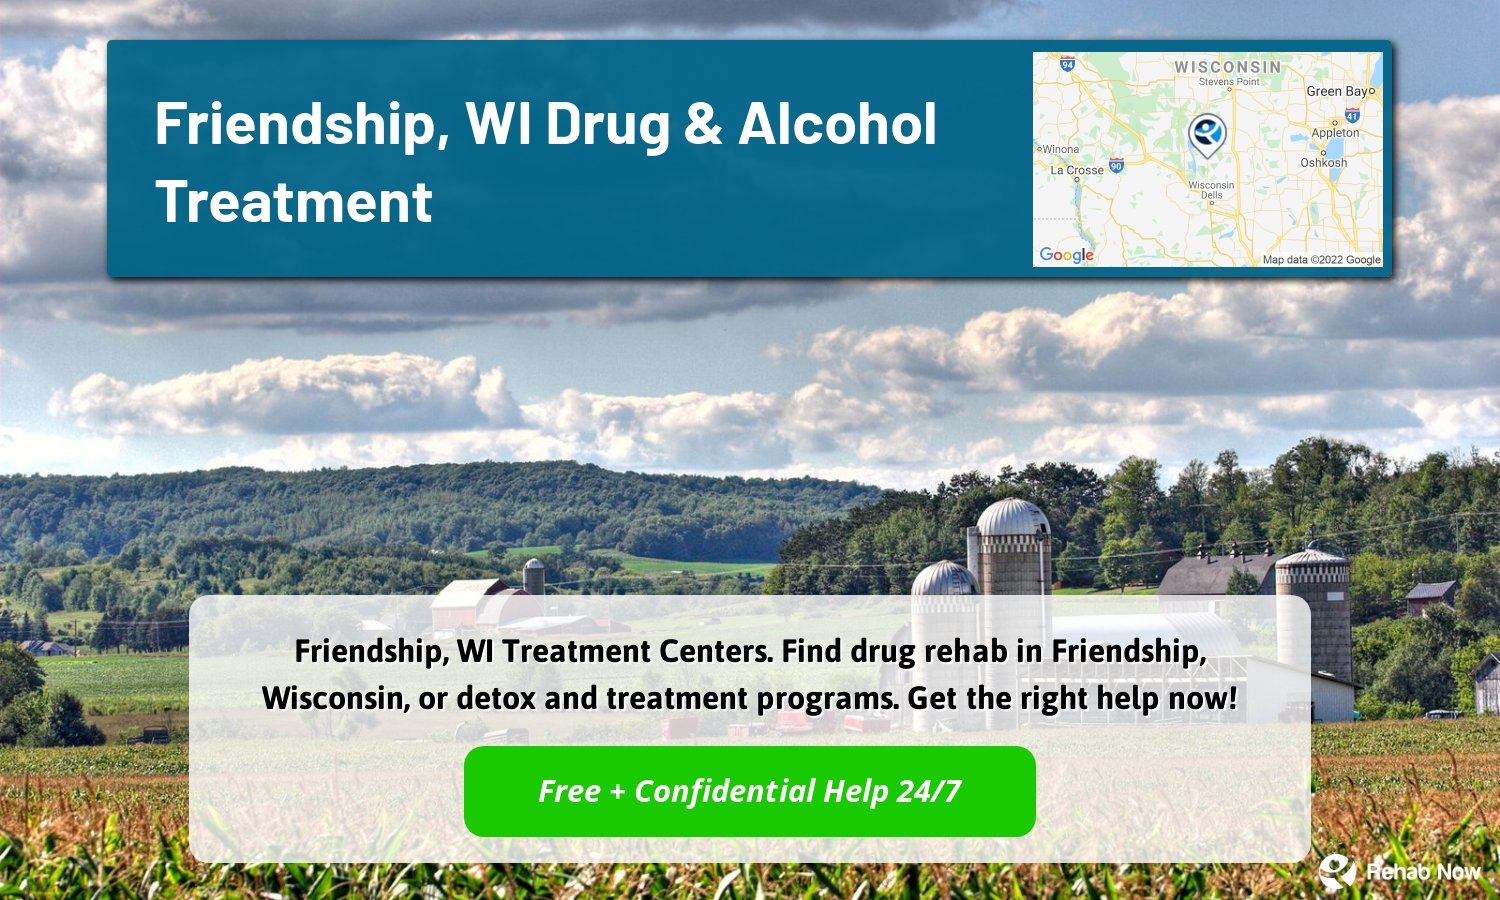 Friendship, WI Treatment Centers. Find drug rehab in Friendship, Wisconsin, or detox and treatment programs. Get the right help now!